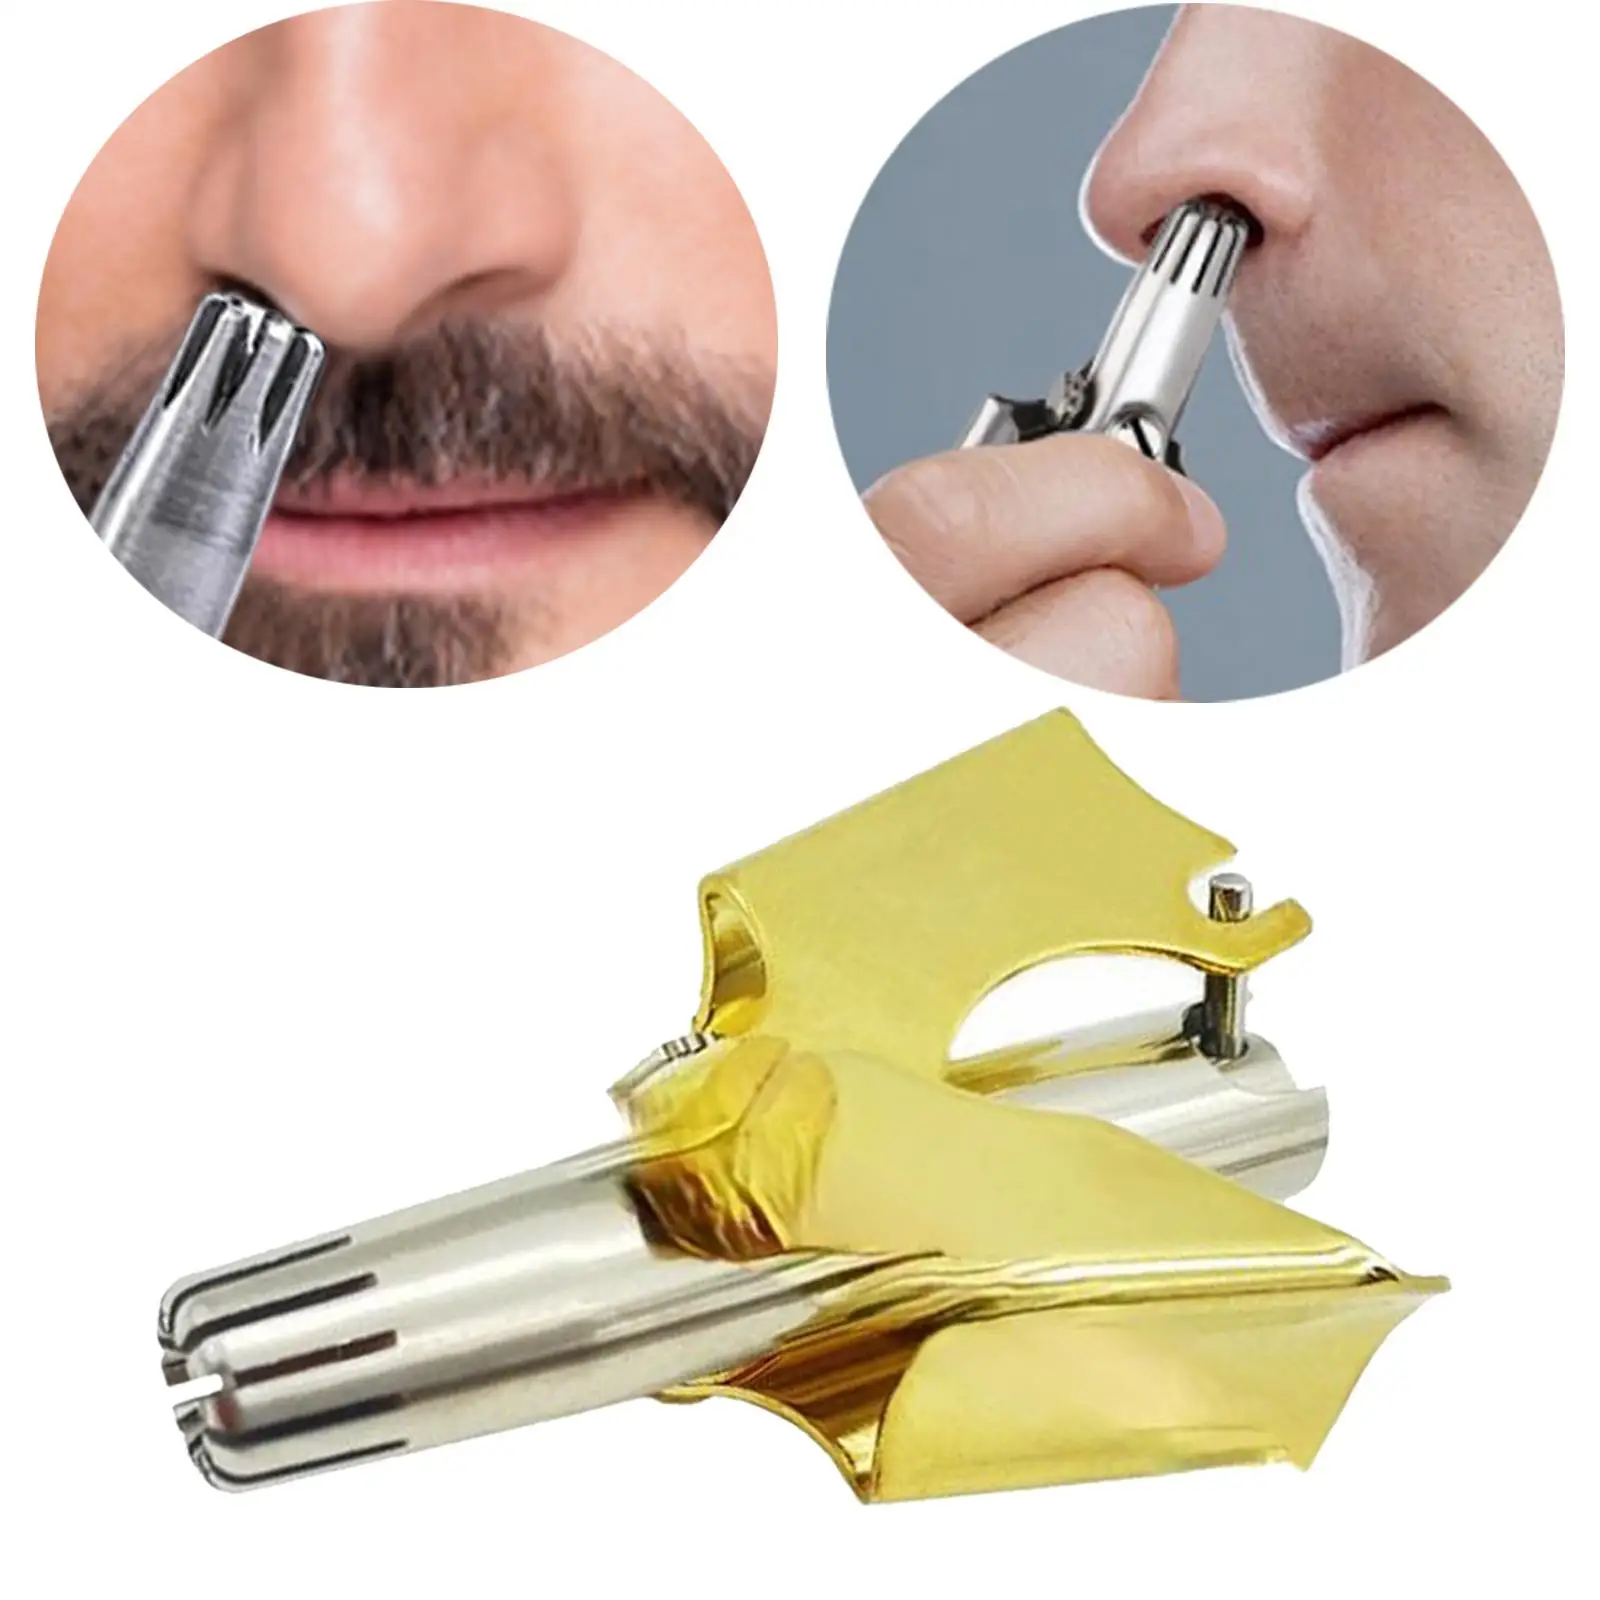 Stainless Steel Manual Nose  Washable Nose  No Batteries Required Ear Hair Cutter Gifts